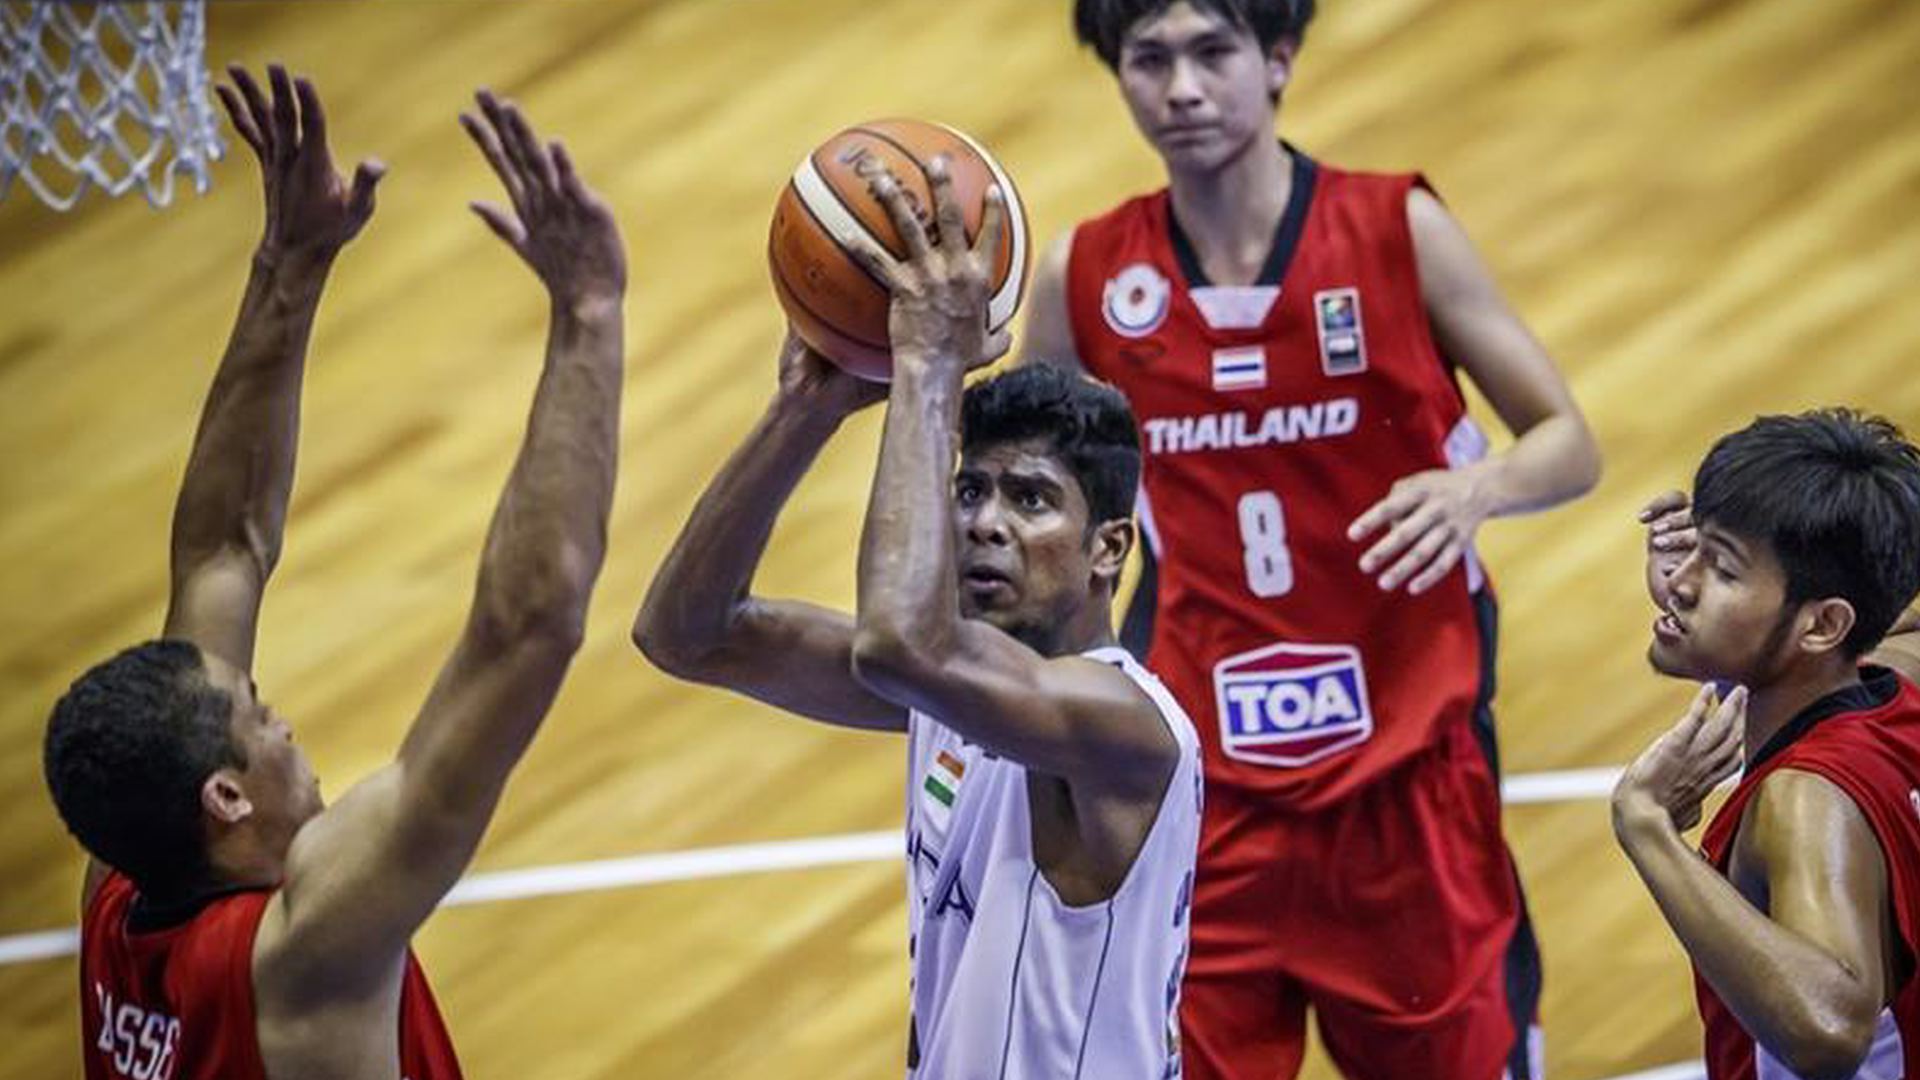 India beat Thailand in basketball tourney